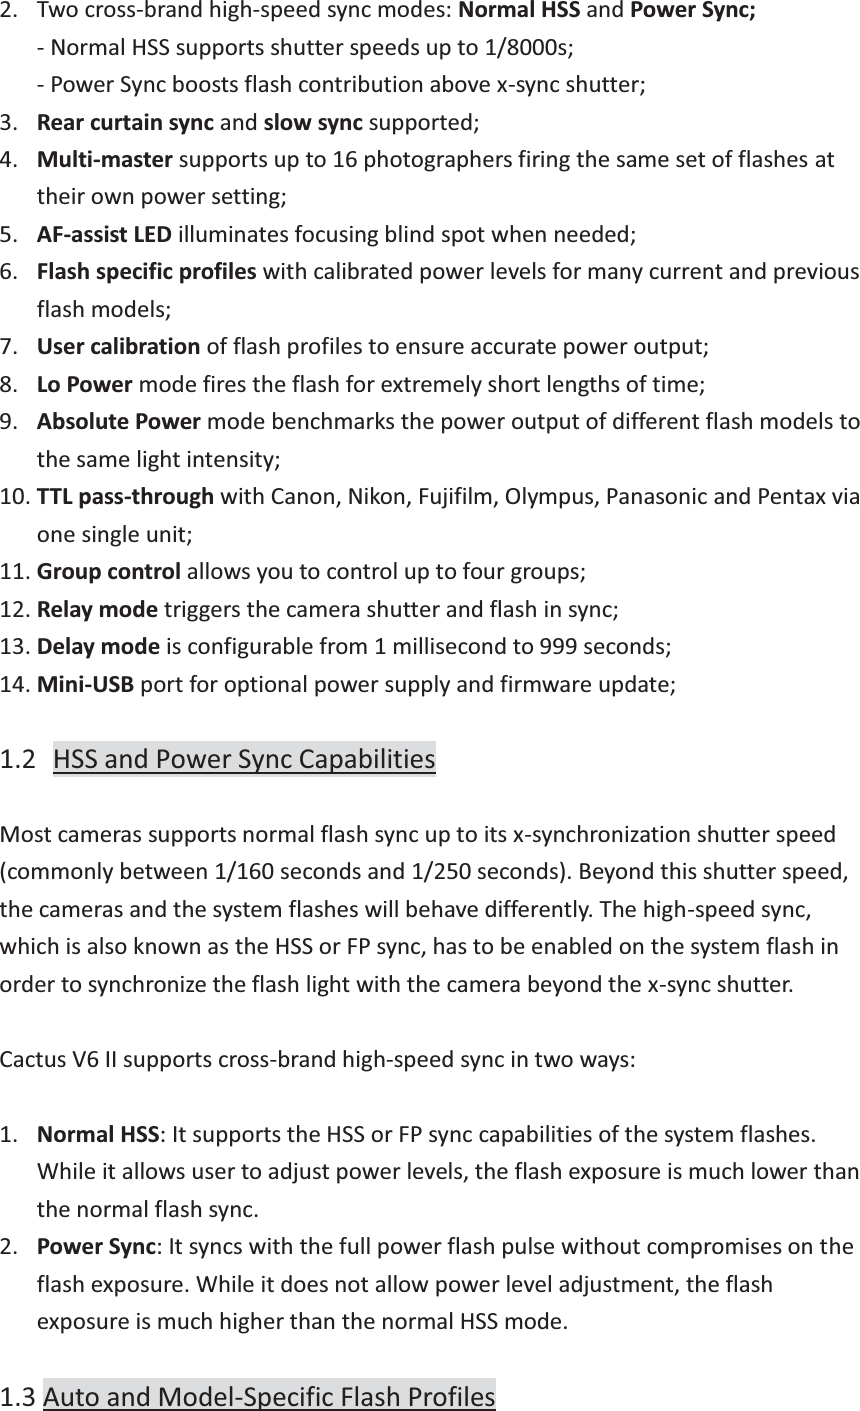 2. Two cross-brand high-speed sync modes: Normal HSS and Power Sync; - Normal HSS supports shutter speeds up to 1/8000s; - Power Sync boosts flash contribution above x-sync shutter; 3. Rear curtain sync and slow sync supported; 4. Multi-master supports up to 16 photographers firing the same set of flashes at their own power setting; 5. AF-assist LED illuminates focusing blind spot when needed; 6. Flash specific profiles with calibrated power levels for many current and previous flash models; 7. User calibration of flash profiles to ensure accurate power output; 8. Lo Power mode fires the flash for extremely short lengths of time; 9. Absolute Power mode benchmarks the power output of different flash models to the same light intensity; 10. TTL pass-through with Canon, Nikon, Fujifilm, Olympus, Panasonic and Pentax via one single unit; 11. Group control allows you to control up to four groups; 12. Relay mode triggers the camera shutter and flash in sync; 13. Delay mode is configurable from 1 millisecond to 999 seconds; 14. Mini-USB port for optional power supply and firmware update;  1.2  HSS and Power Sync Capabilities  Most cameras supports normal flash sync up to its x-synchronization shutter speed (commonly between 1/160 seconds and 1/250 seconds). Beyond this shutter speed, the cameras and the system flashes will behave differently. The high-speed sync, which is also known as the HSS or FP sync, has to be enabled on the system flash in order to synchronize the flash light with the camera beyond the x-sync shutter.  Cactus V6 II supports cross-brand high-speed sync in two ways:  1. Normal HSS: It supports the HSS or FP sync capabilities of the system flashes. While it allows user to adjust power levels, the flash exposure is much lower than the normal flash sync. 2. Power Sync: It syncs with the full power flash pulse without compromises on the flash exposure. While it does not allow power level adjustment, the flash exposure is much higher than the normal HSS mode.  1.3 Auto and Model-Specific Flash Profiles 